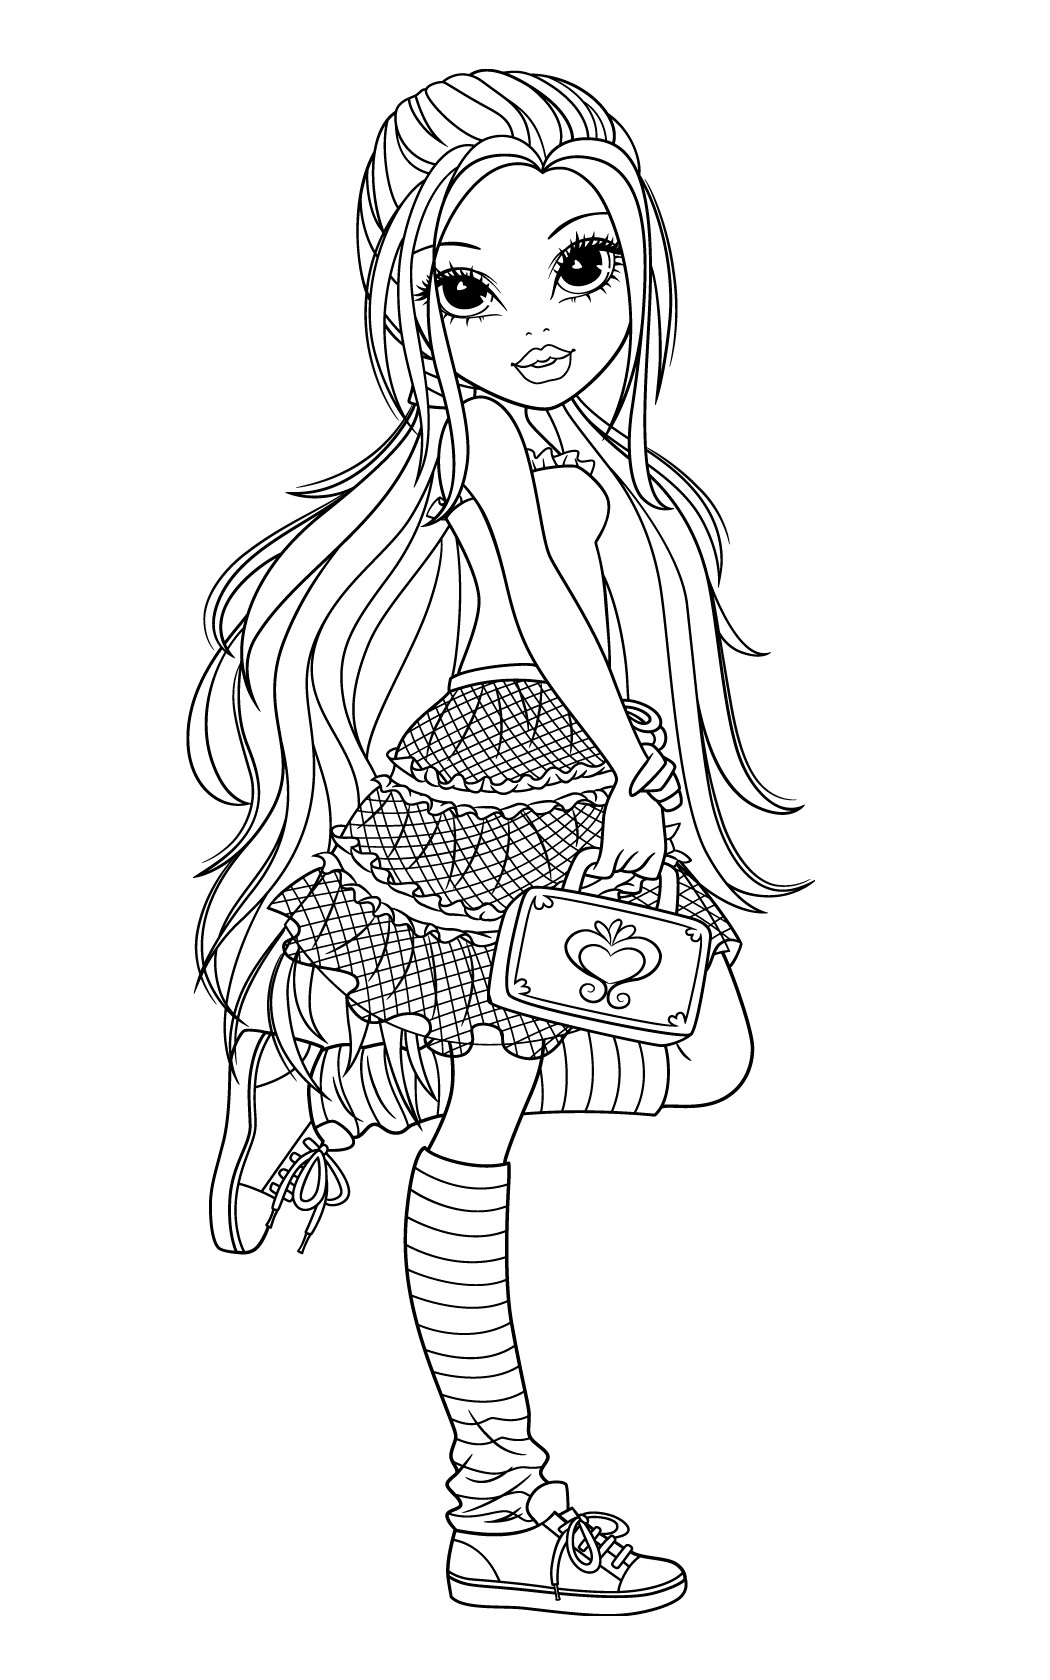 Girl Coloring Pages Printable
 New Moxie Girlz Coloring Pages will be added frequently so